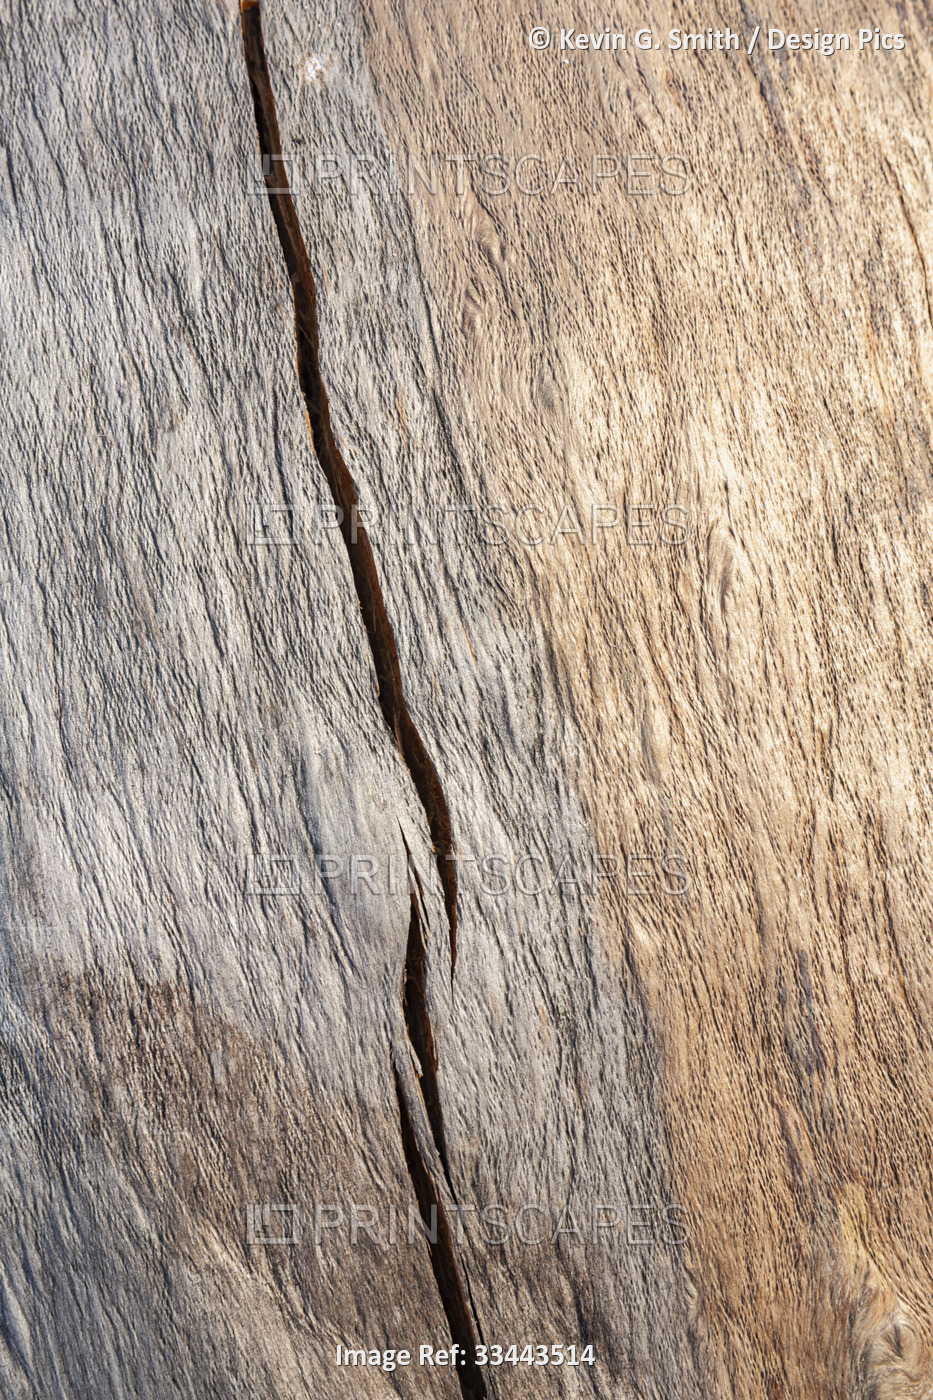 Close-up detail of weathered wood grain pattern in a spruce burl in Summer, ...